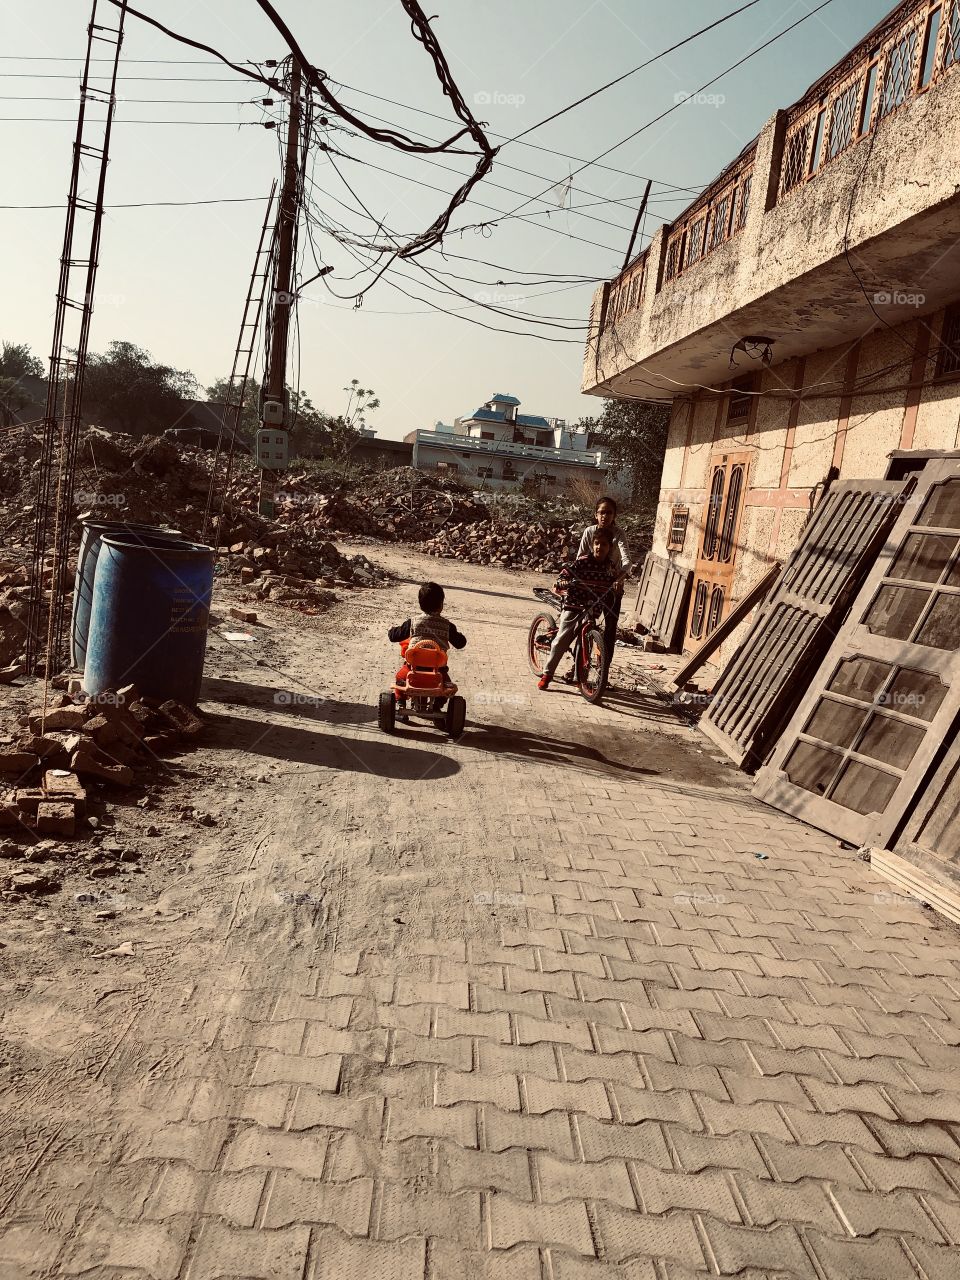 KIDS PLAYING STREETS OF INDIA 🇮🇳